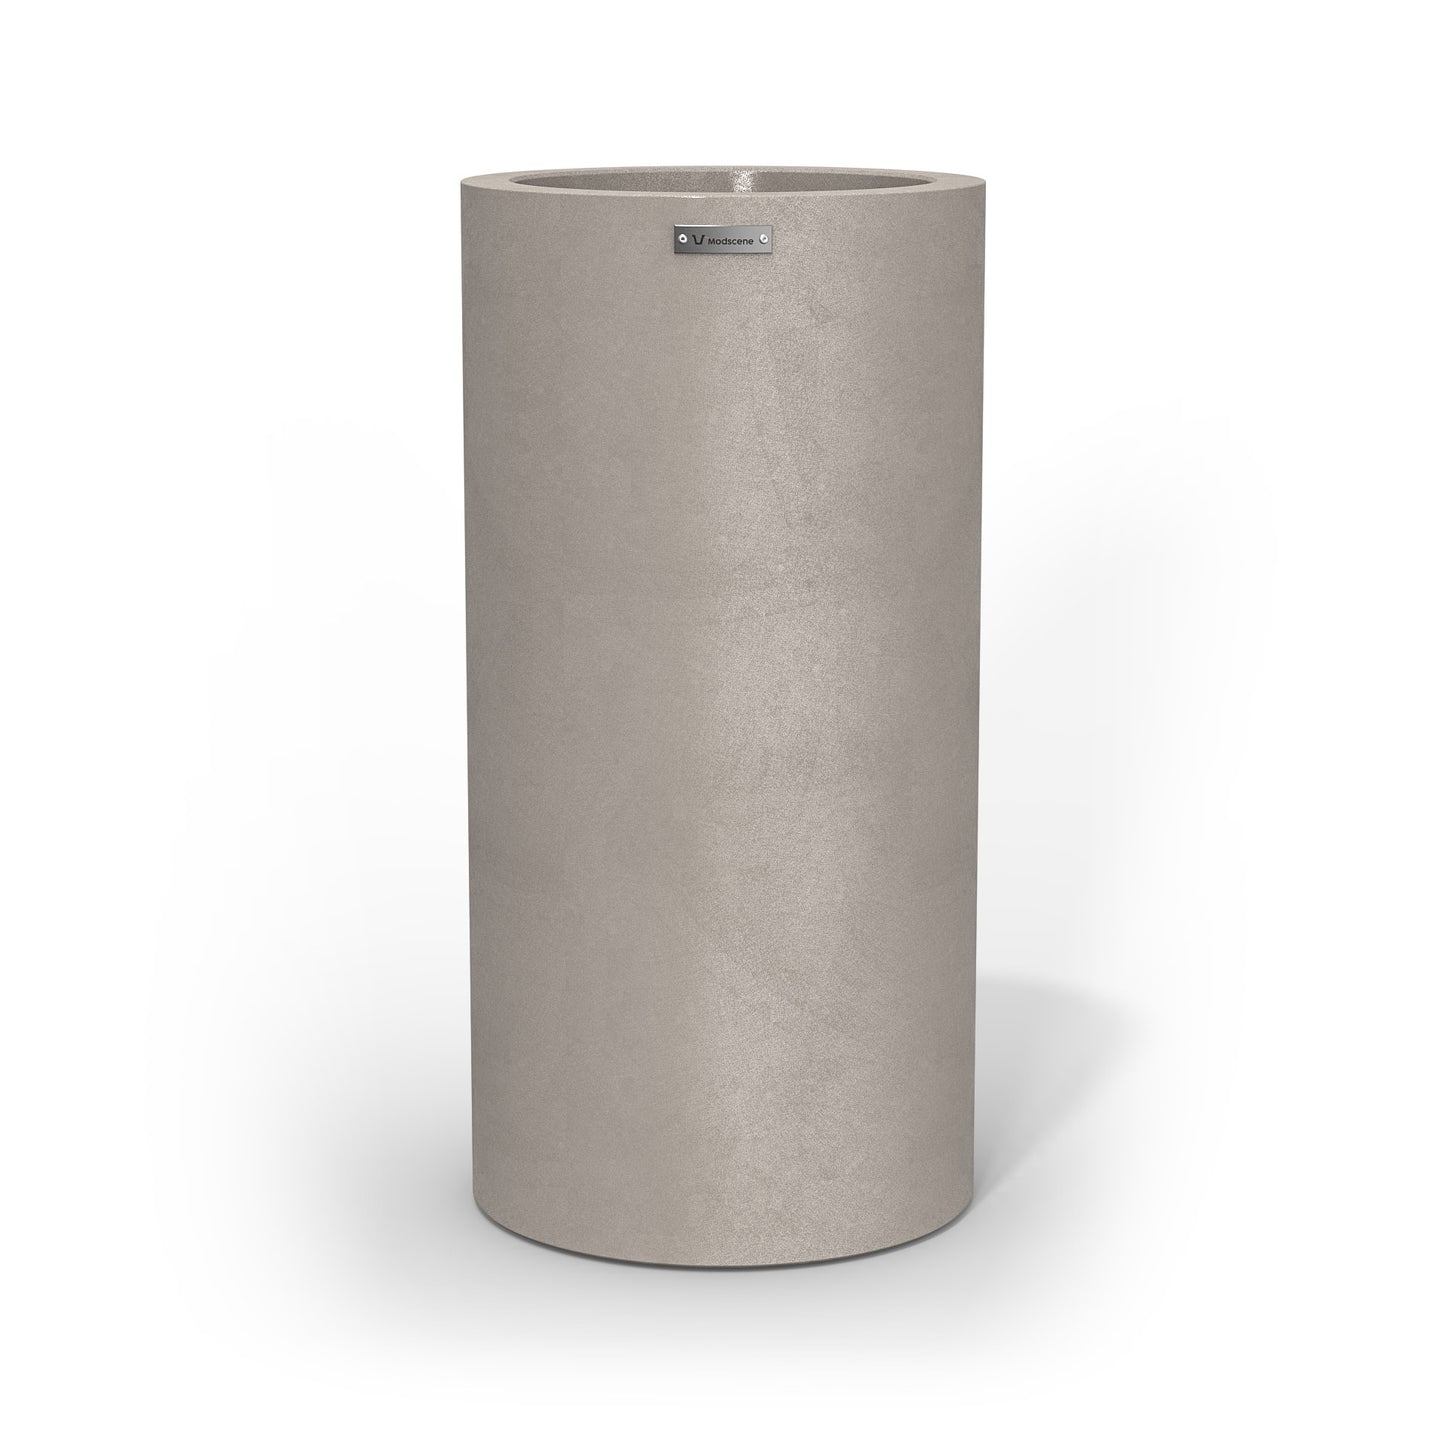 A tall cigar cylinder planter pot in a sandstone colour with a concrete look finish.